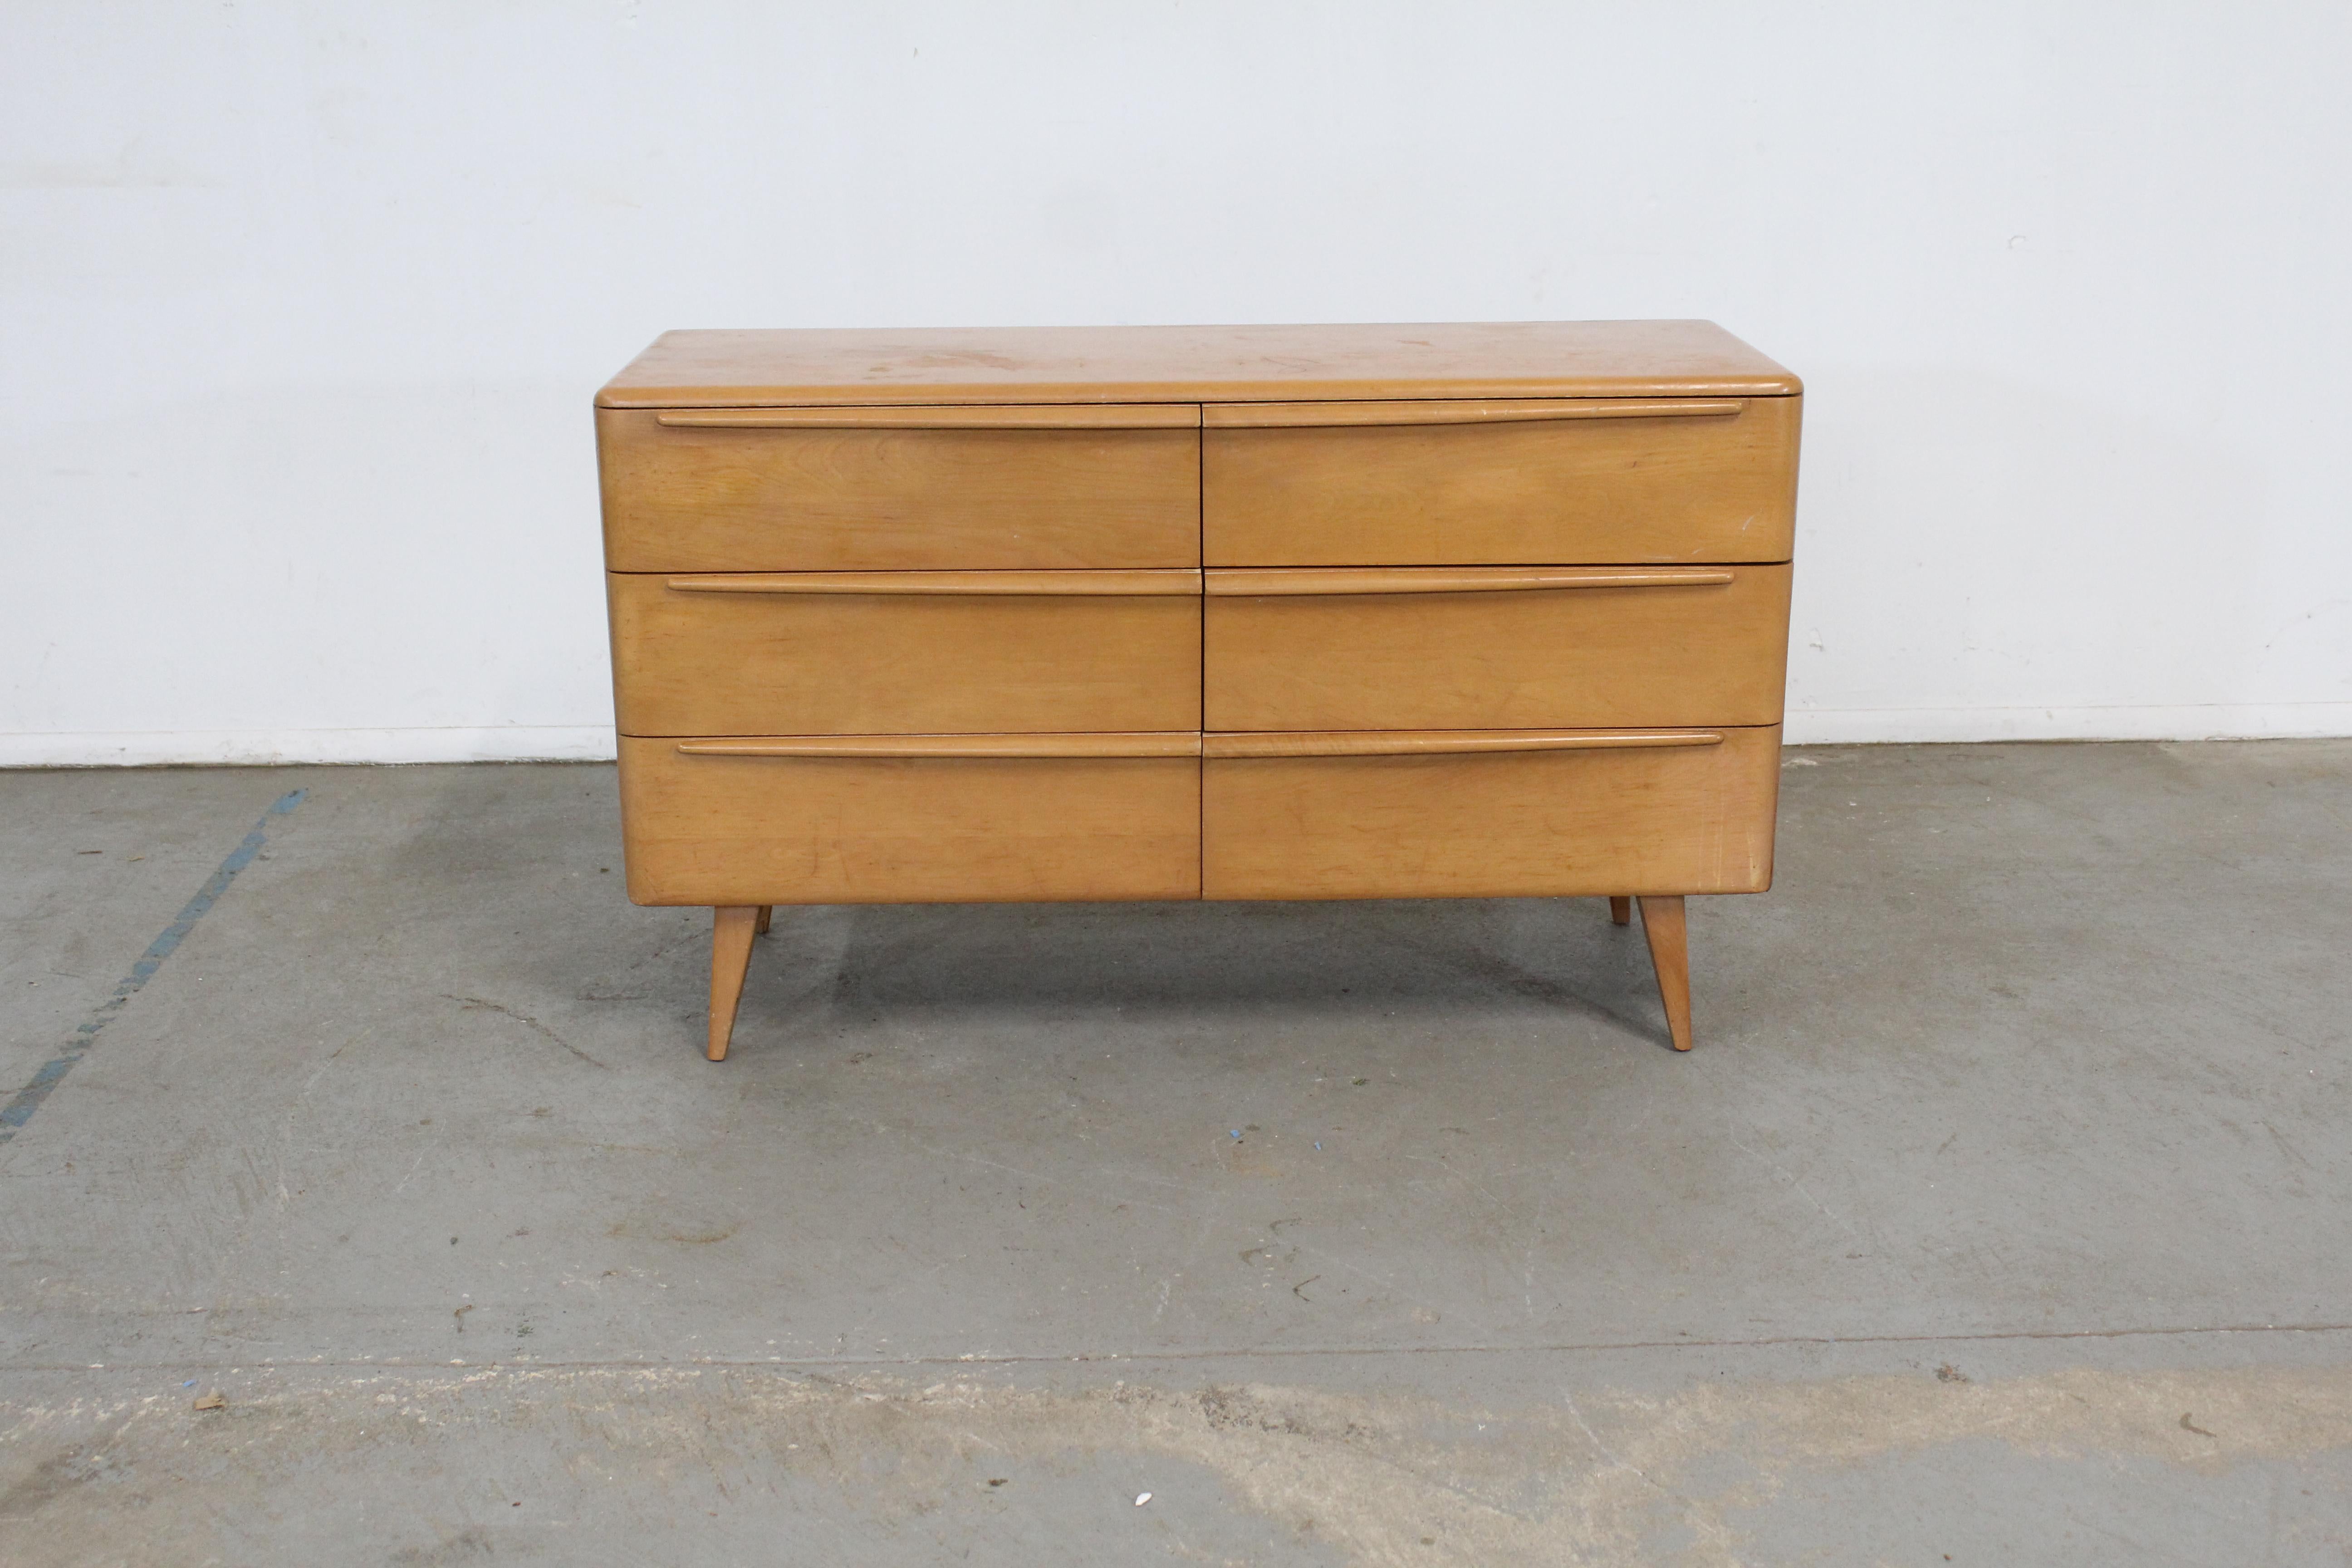 Mid-Century Modern Heywood Wakefield Encore Double Dresser/Credenza on Splayed Legs
Offered is a Mid-Century Modern Heywood Wakefield Encore Double Dresser/Credenza on Splayed Legs. It is from Heywood Wakefield's Encore Series. The piece is in good